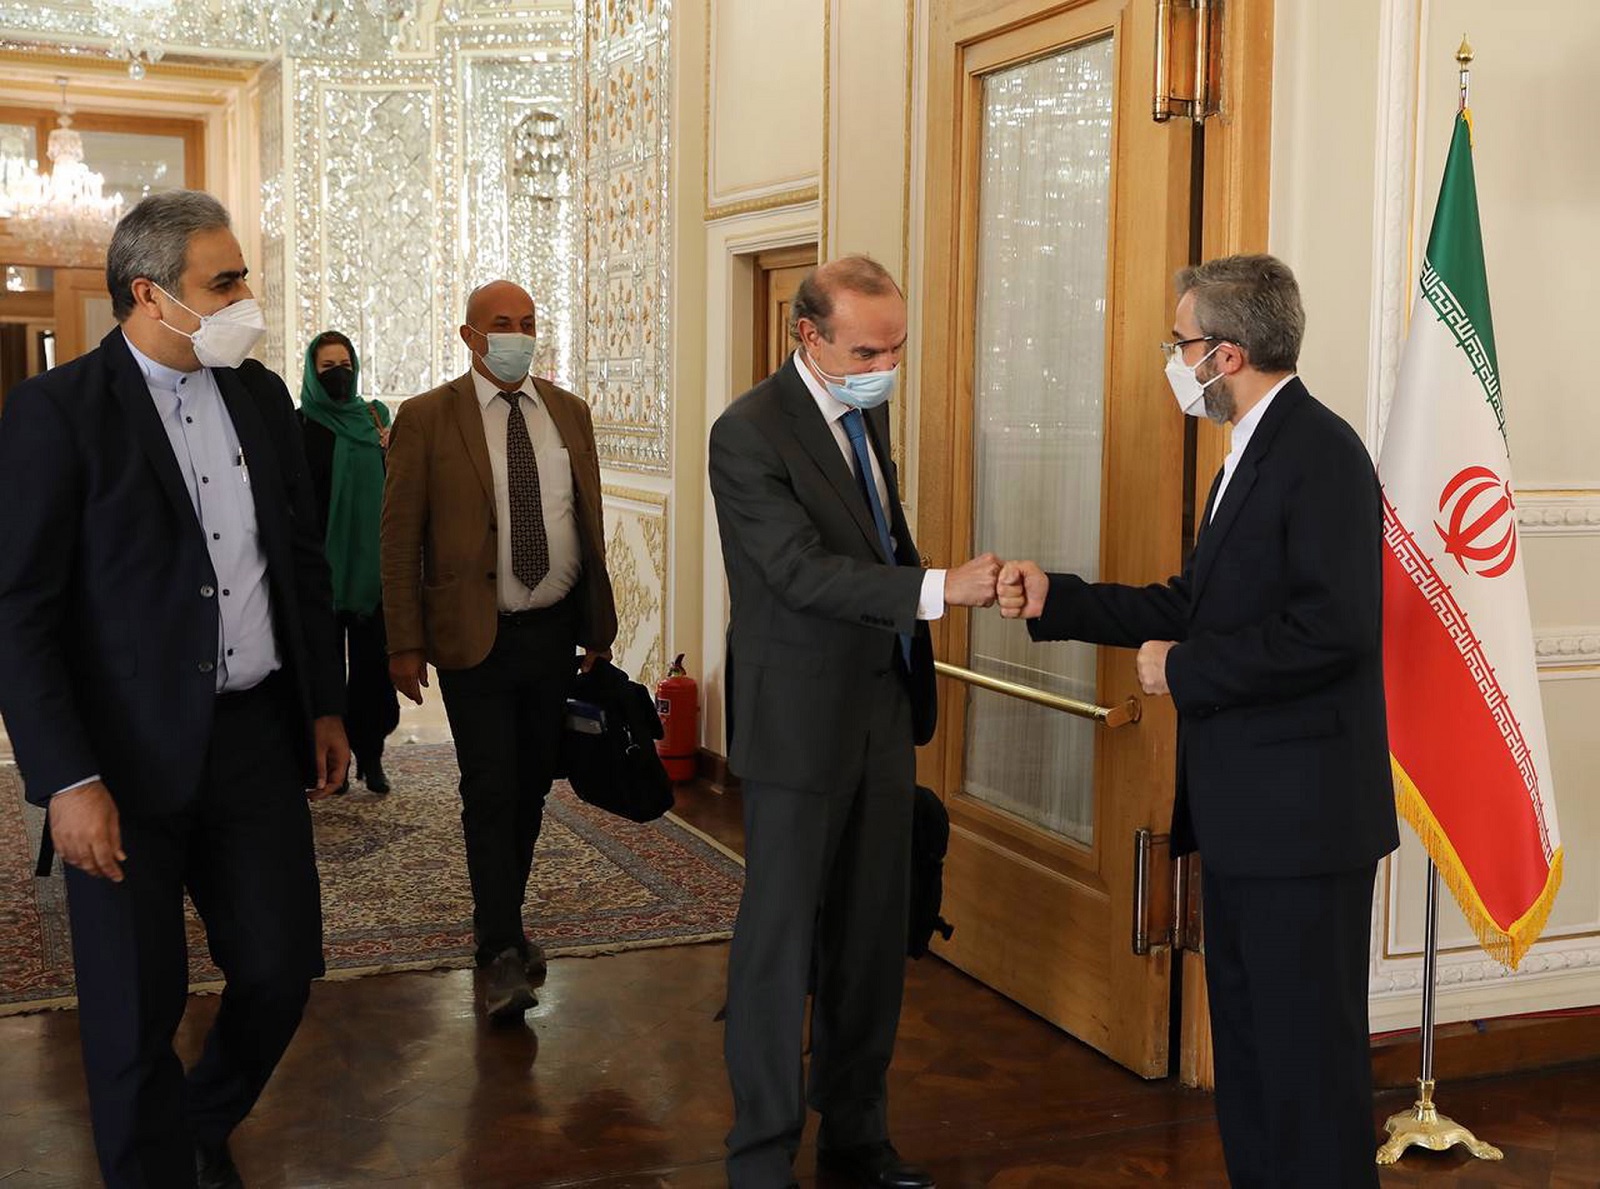 epa09523044 A handout photo made available by Iran's Ministry of Foreign Affairs shows Iranian Deputy Foreign Minister Ali Bagheri (R) welcoming EU coordinator of nuclear talks Enrique Mora (2-R), in Tehran, Iran, 14 October 2021. Mora is on an official visit to Tehran to discuss with Iranian officials about stalled negotiations to revive the Iran nuclear deal.  EPA/IRANIAN MINISTRY OF FOREIGN AFFAIRS HANDOUT  HANDOUT EDITORIAL USE ONLY/NO SALES